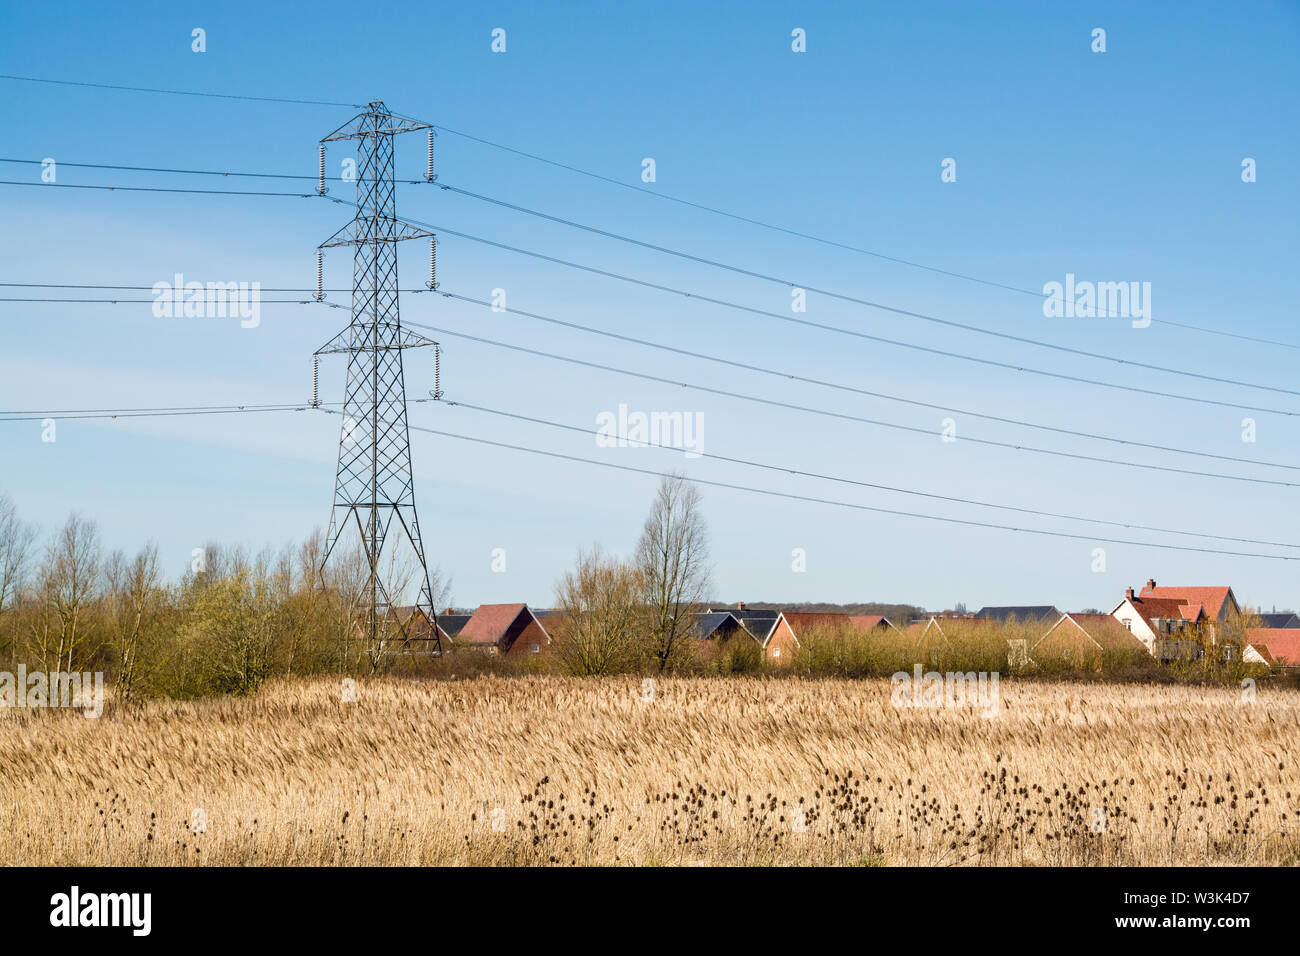 A utility pole and electric power lines above the houses Stock Photo